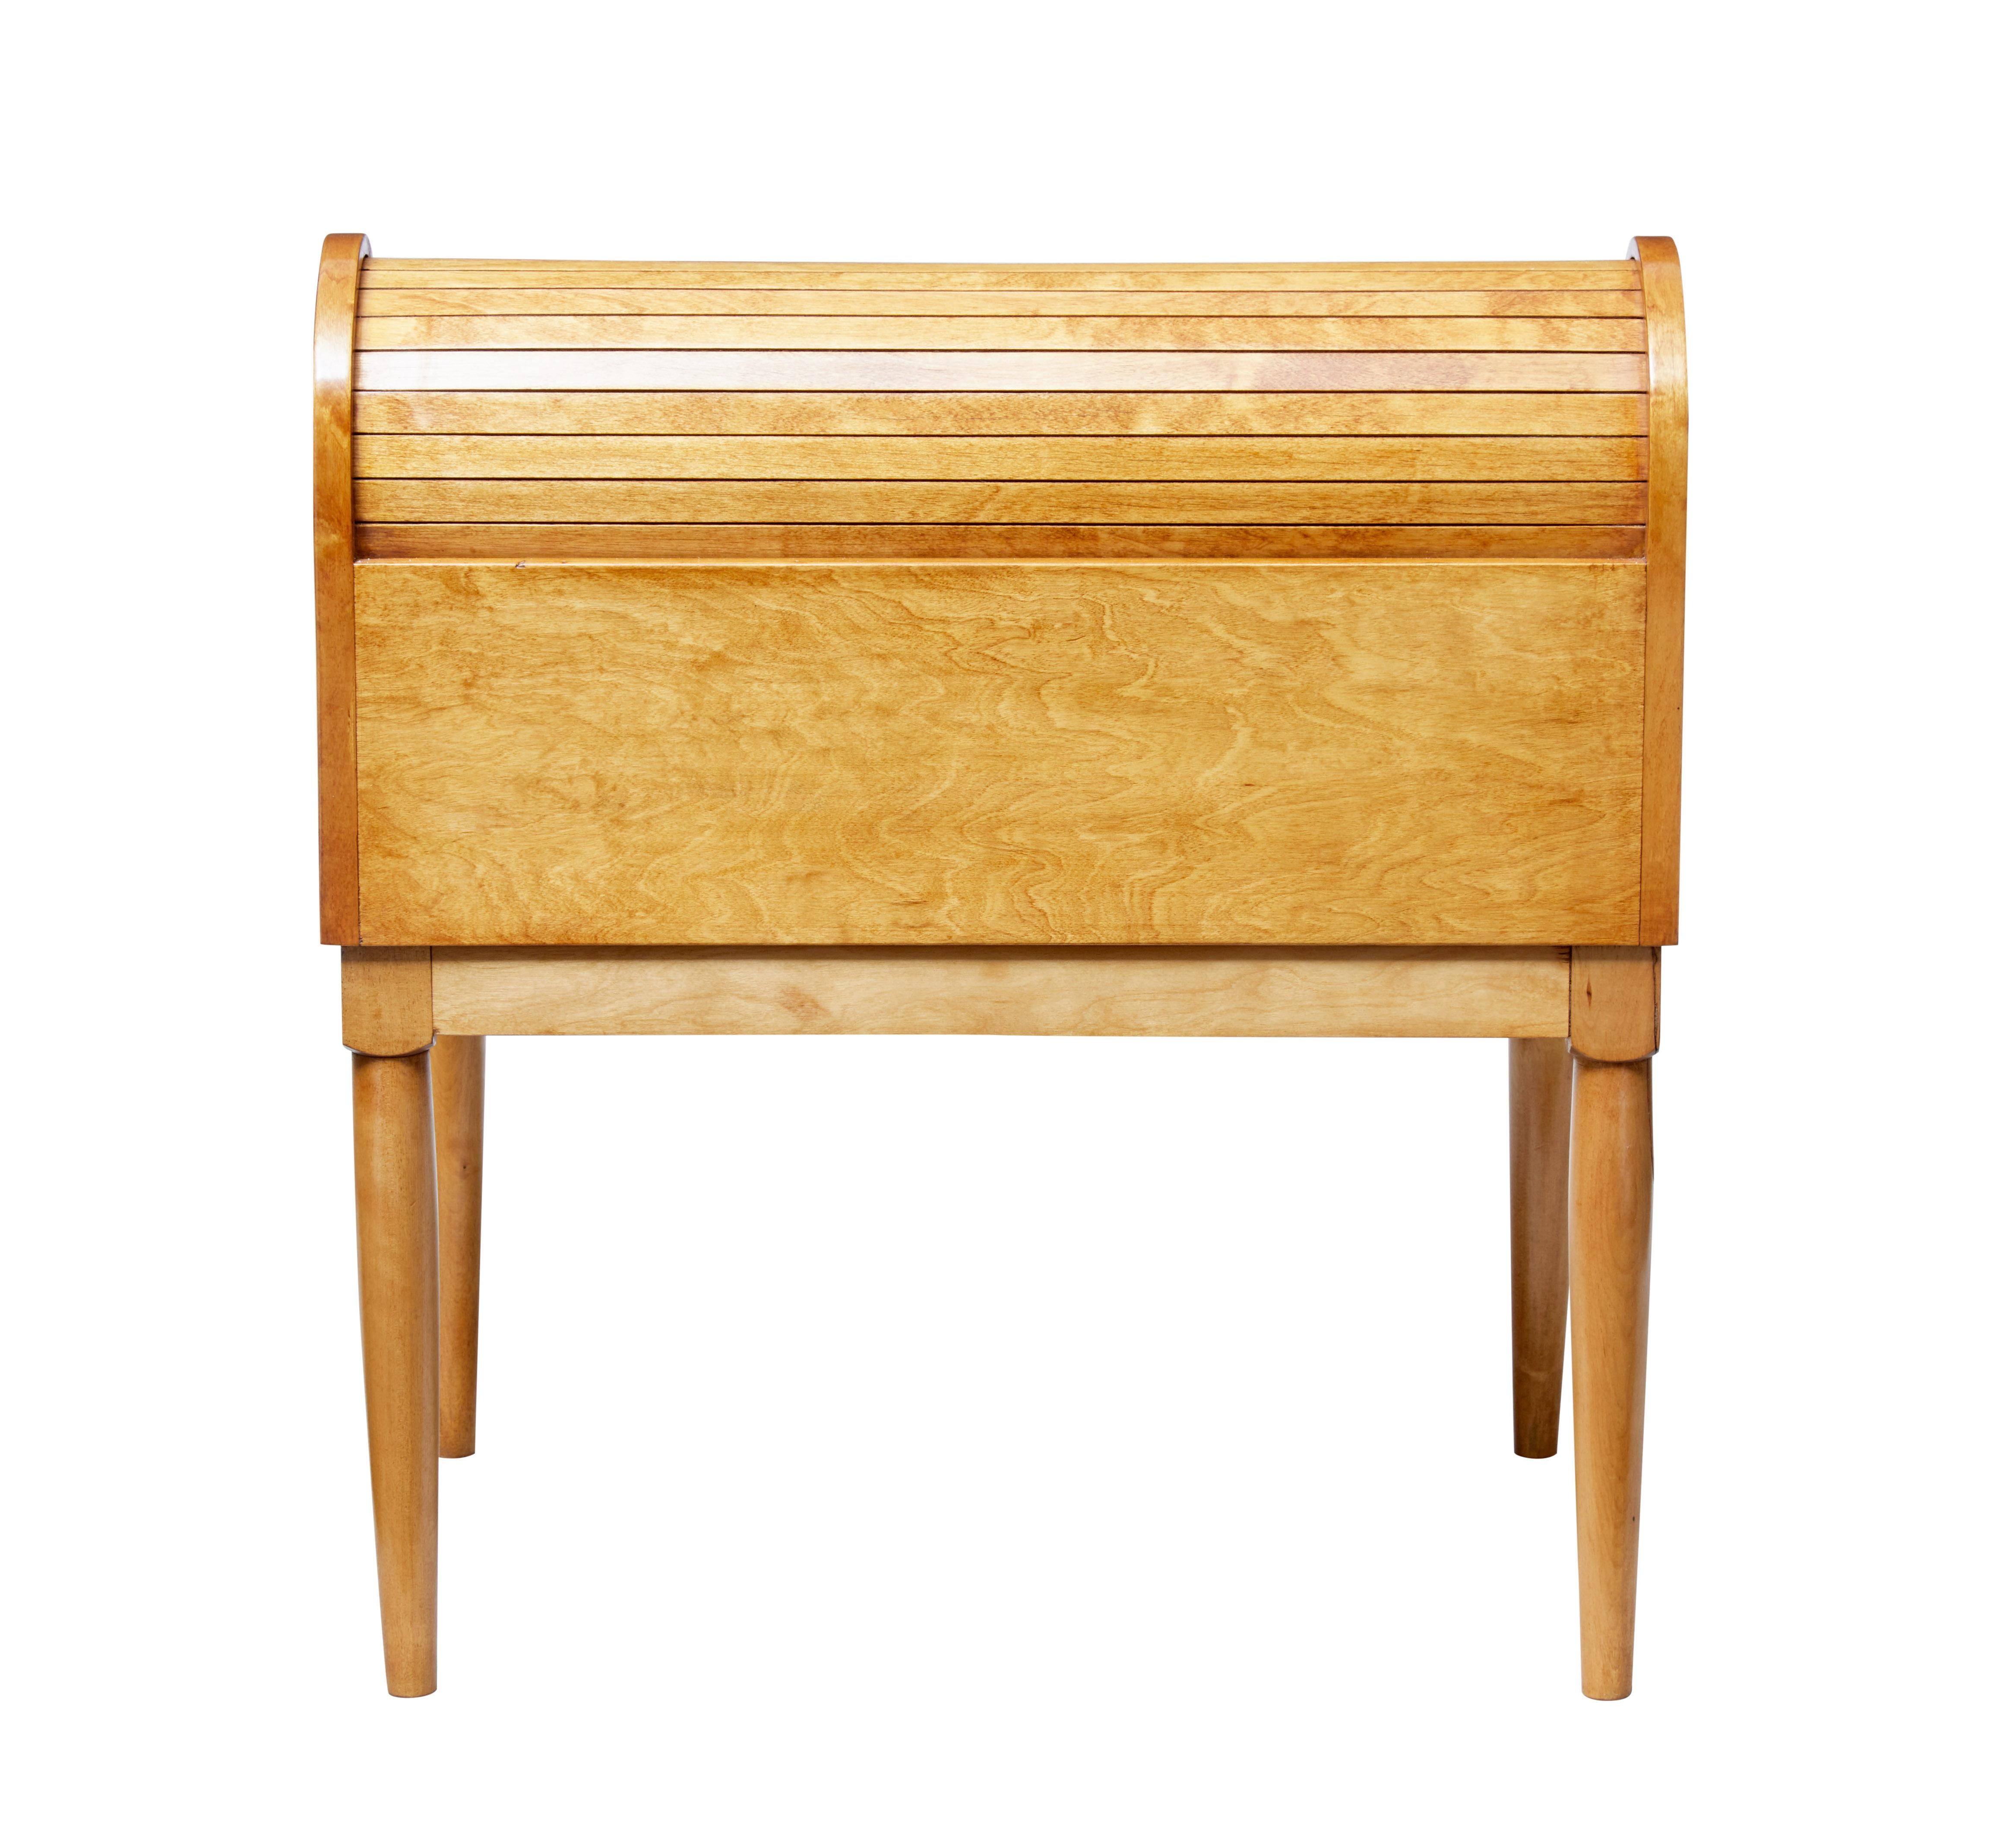 Woodwork Mid-20th Century Birch Tambour Sewing Box on Stand